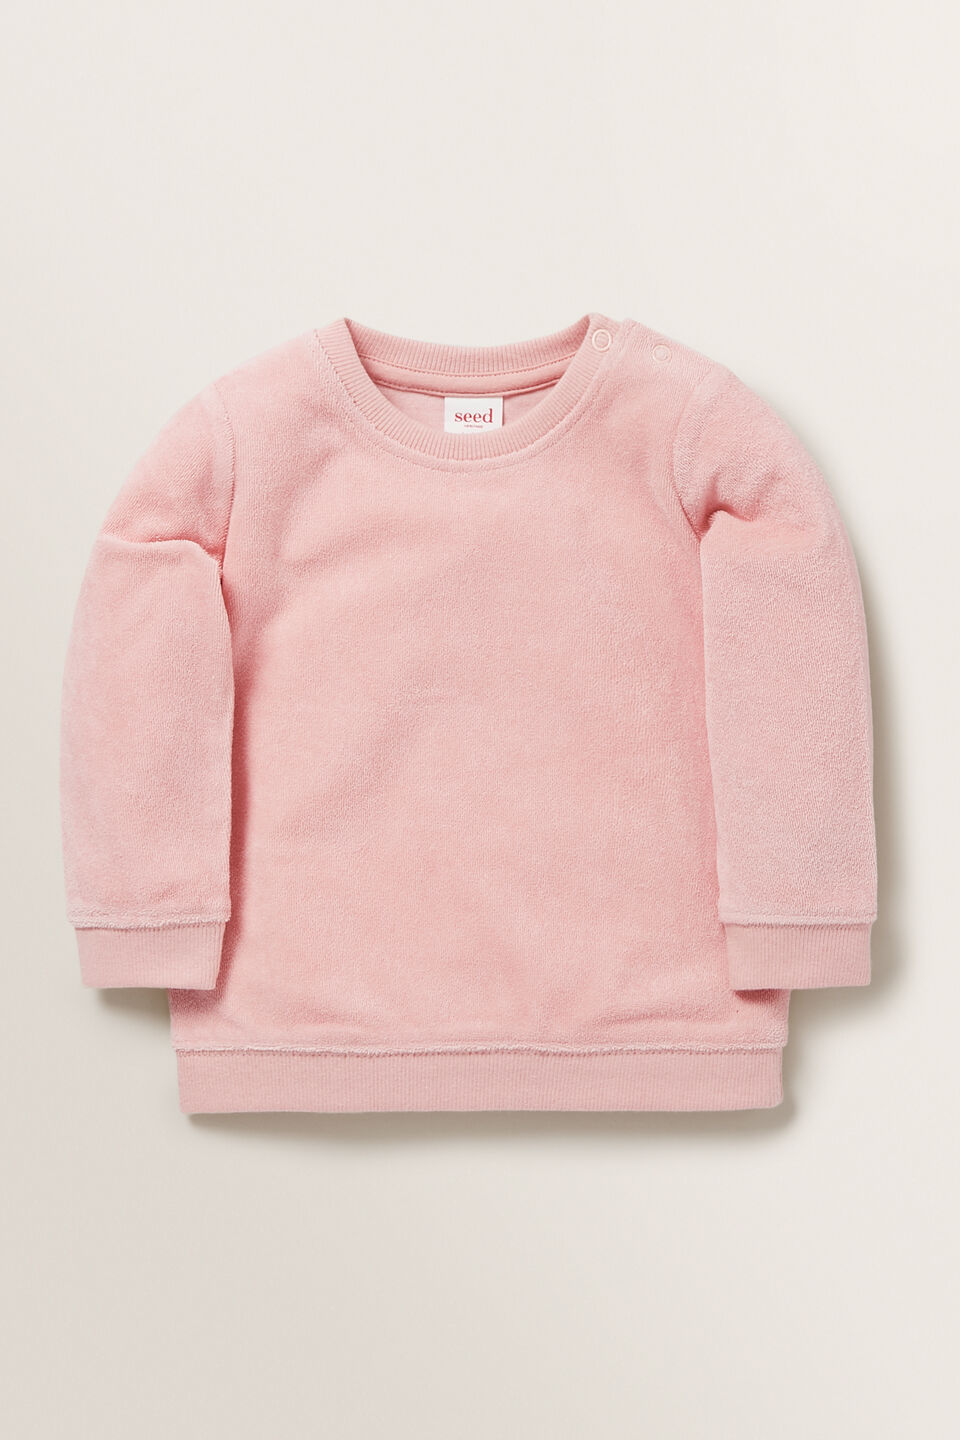 Terry Towelling Windcheater  Dusty Rose